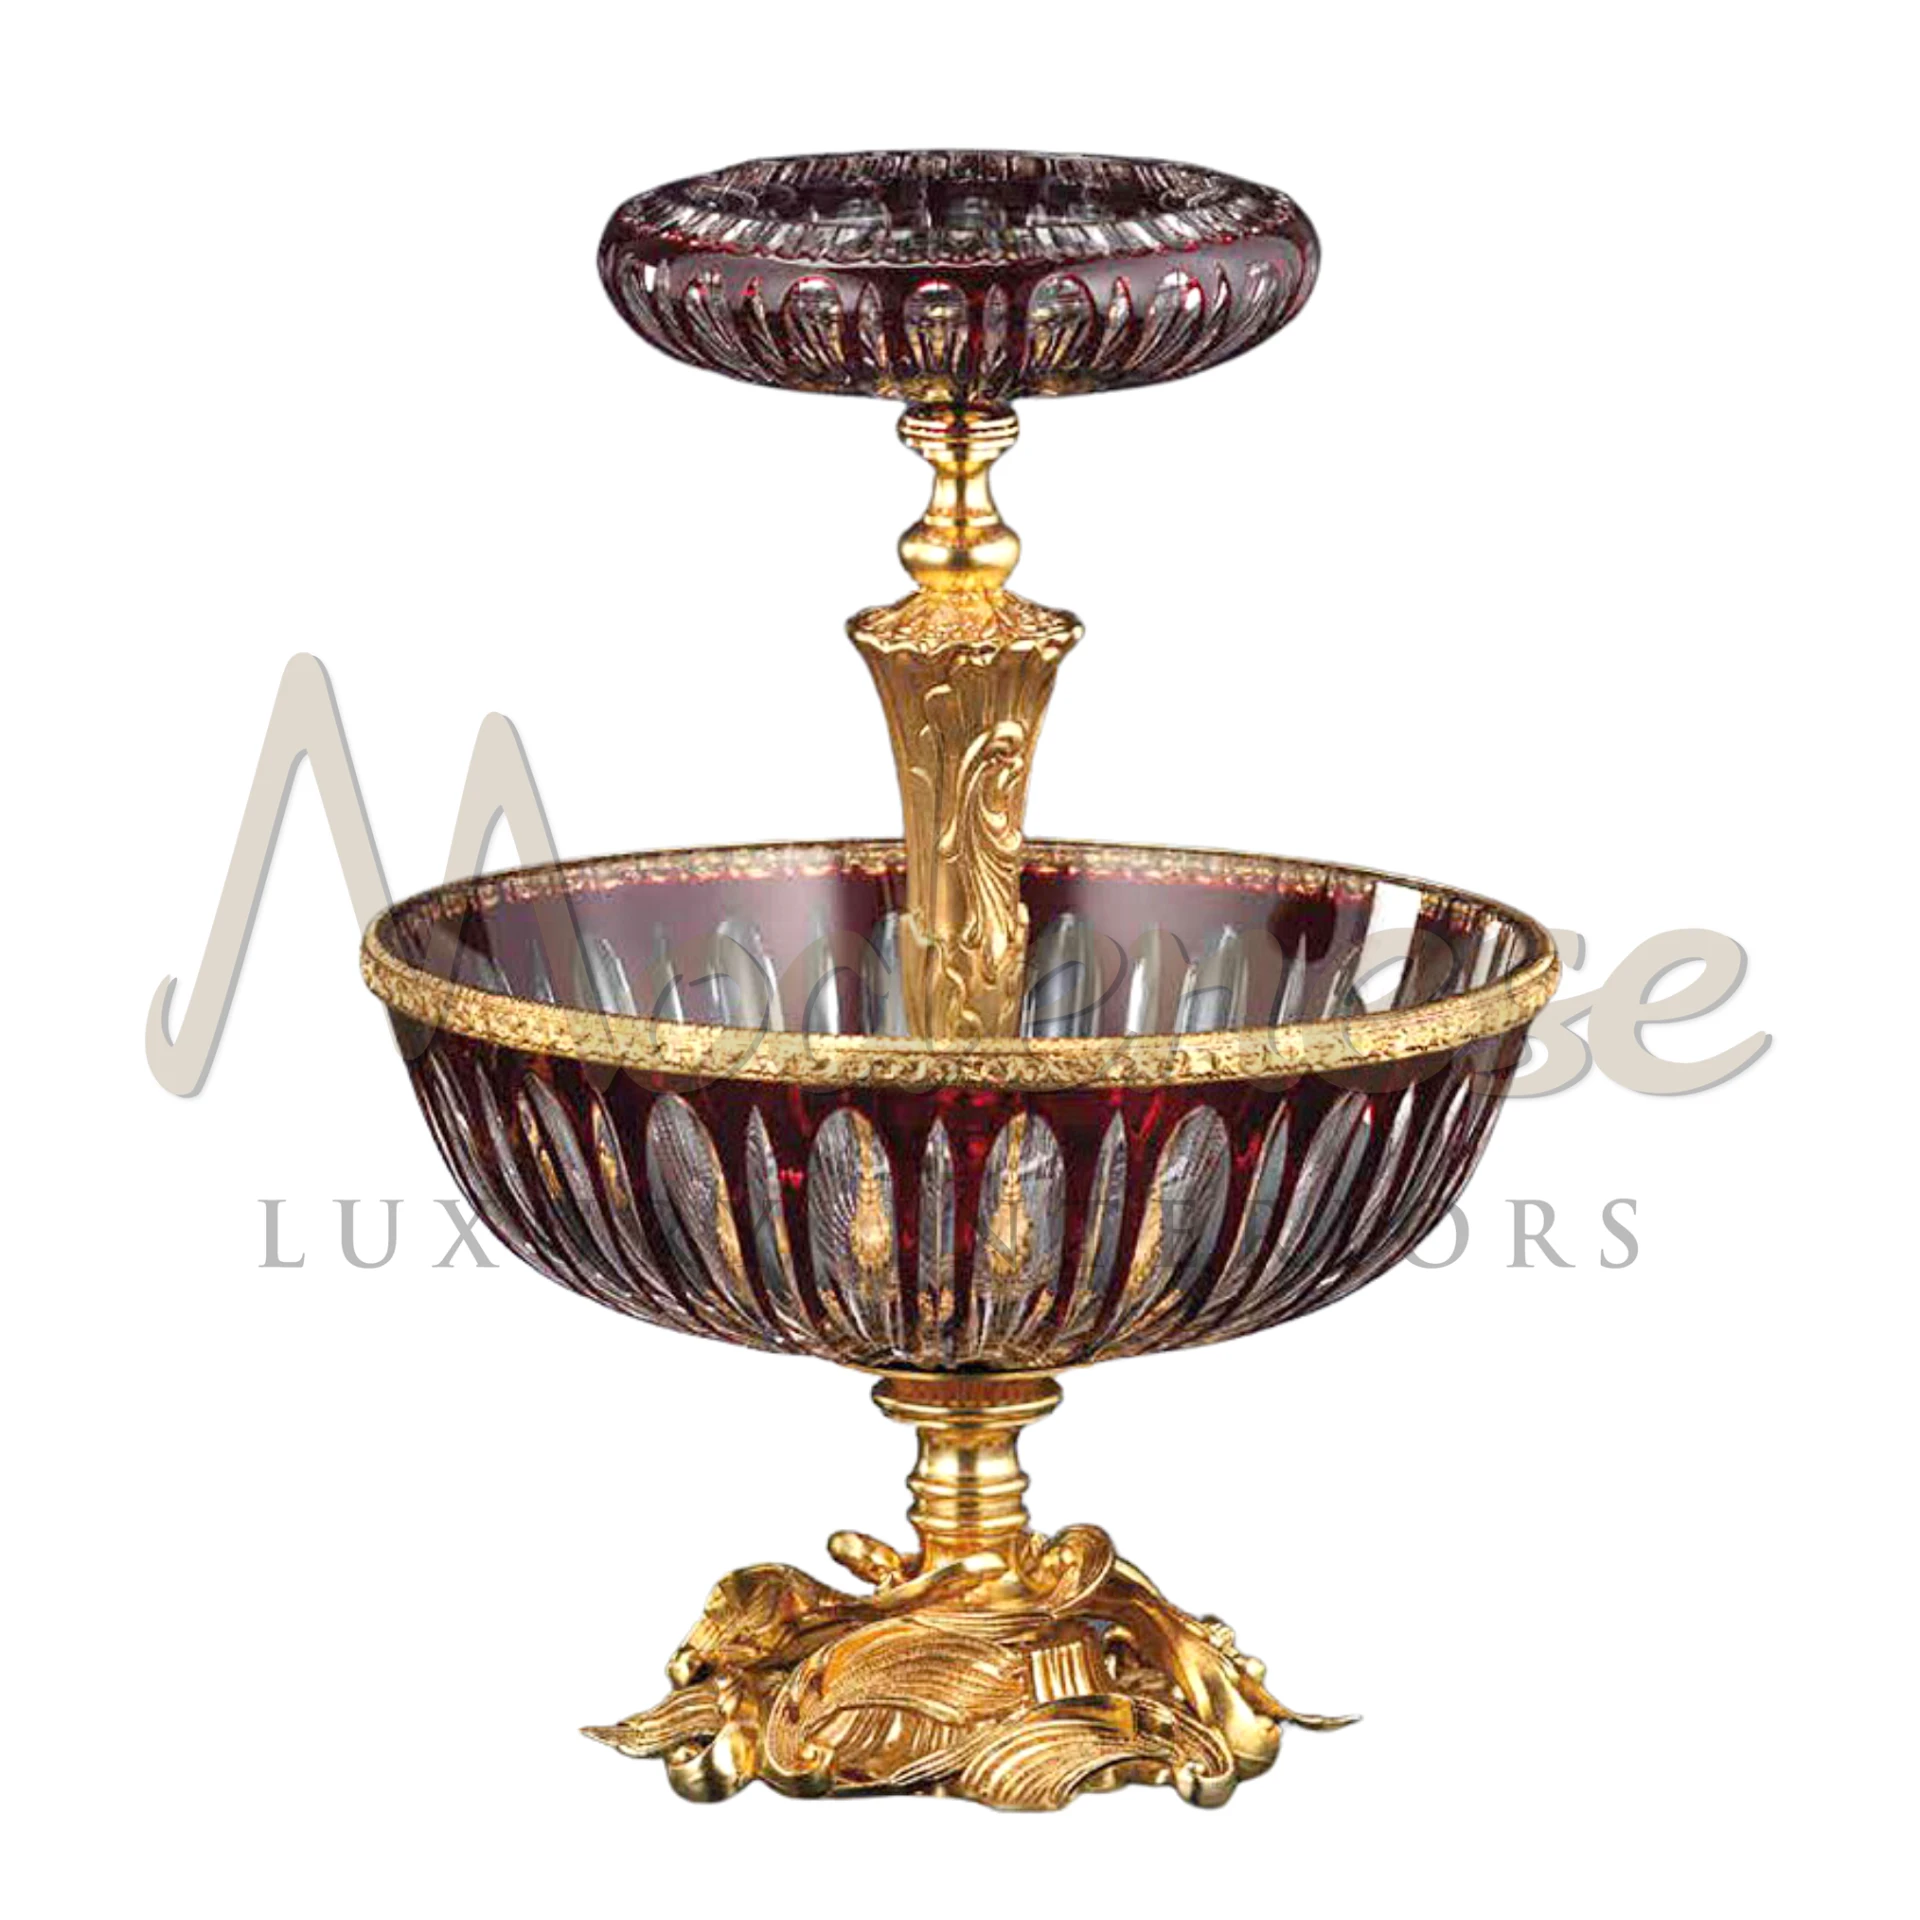 Classical Double Deck Bowl, perfect for luxury interior design, used in formal settings like dining rooms, blending classic and Baroque elegance.






